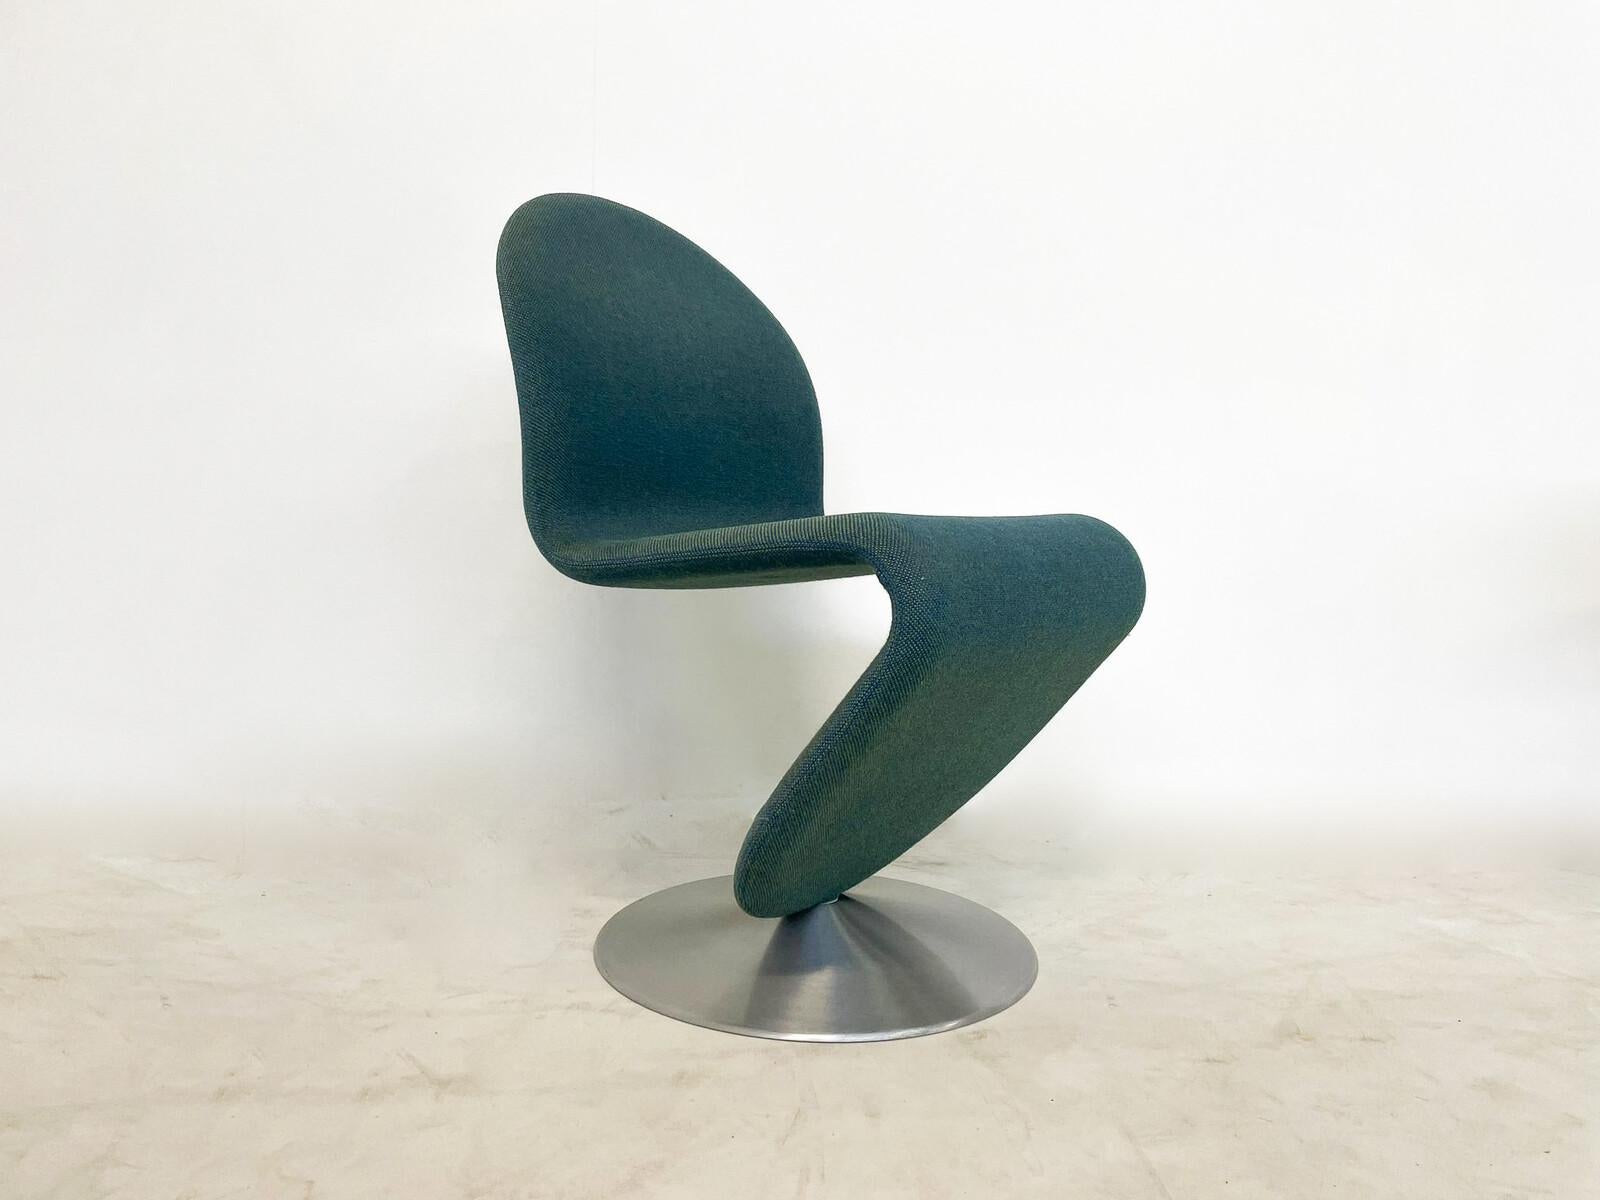 Late 20th Century Mid-Century Modern 'System 123' Chair by Verner Panton, Denmark, 1973 For Sale